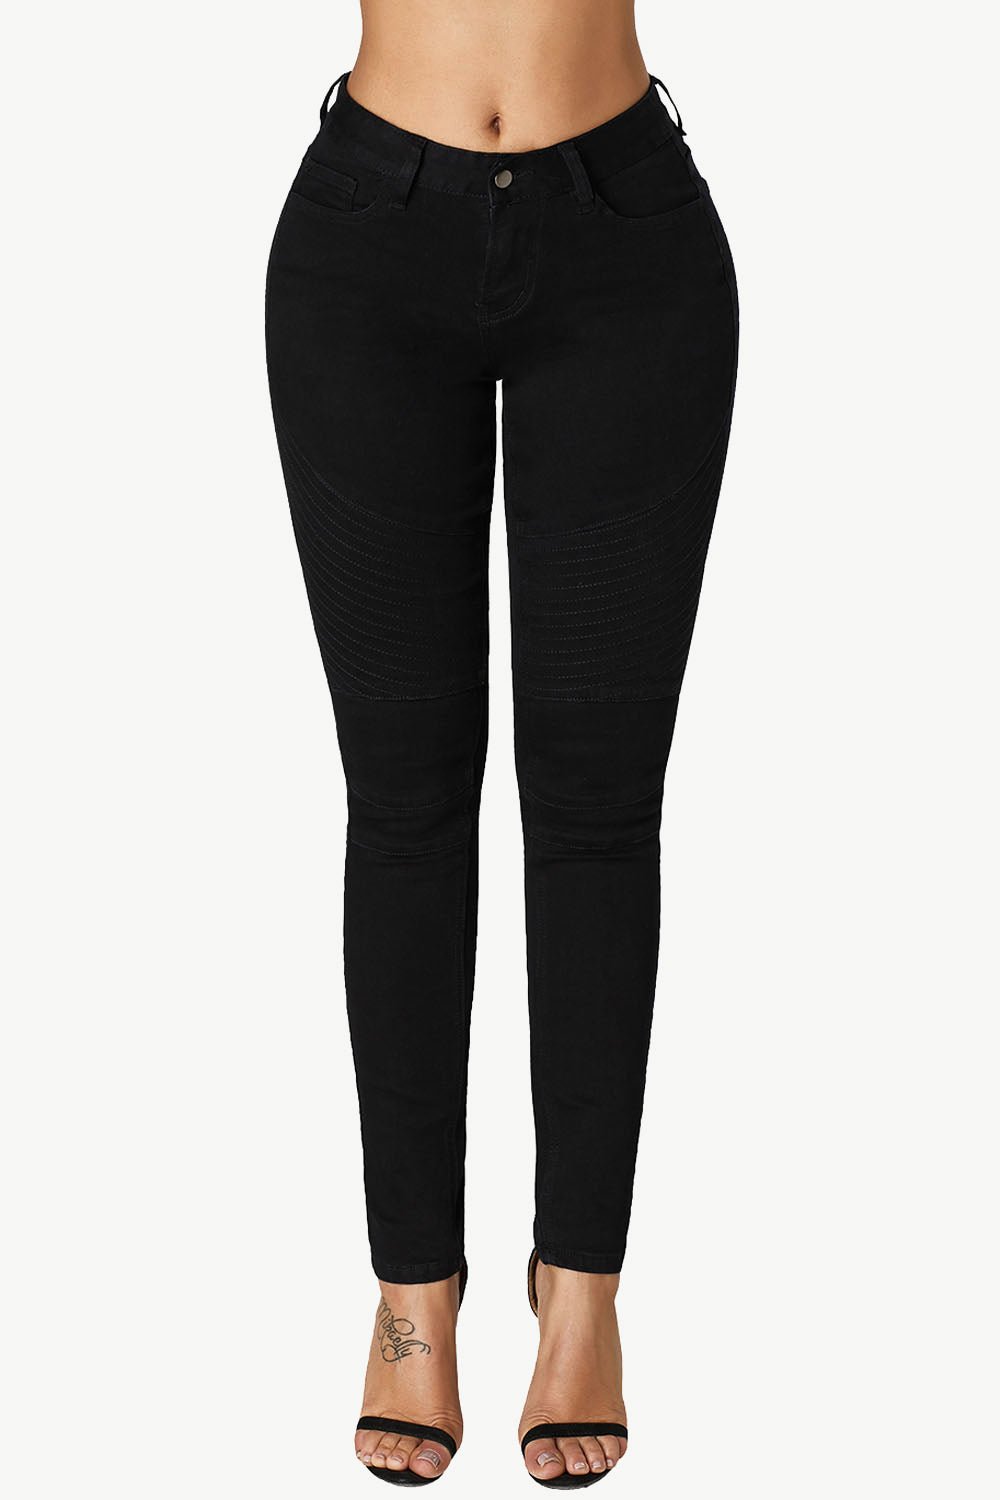 Mid-Rise Waist Skinny Pocketed Jeans - Kinsley & Harlow